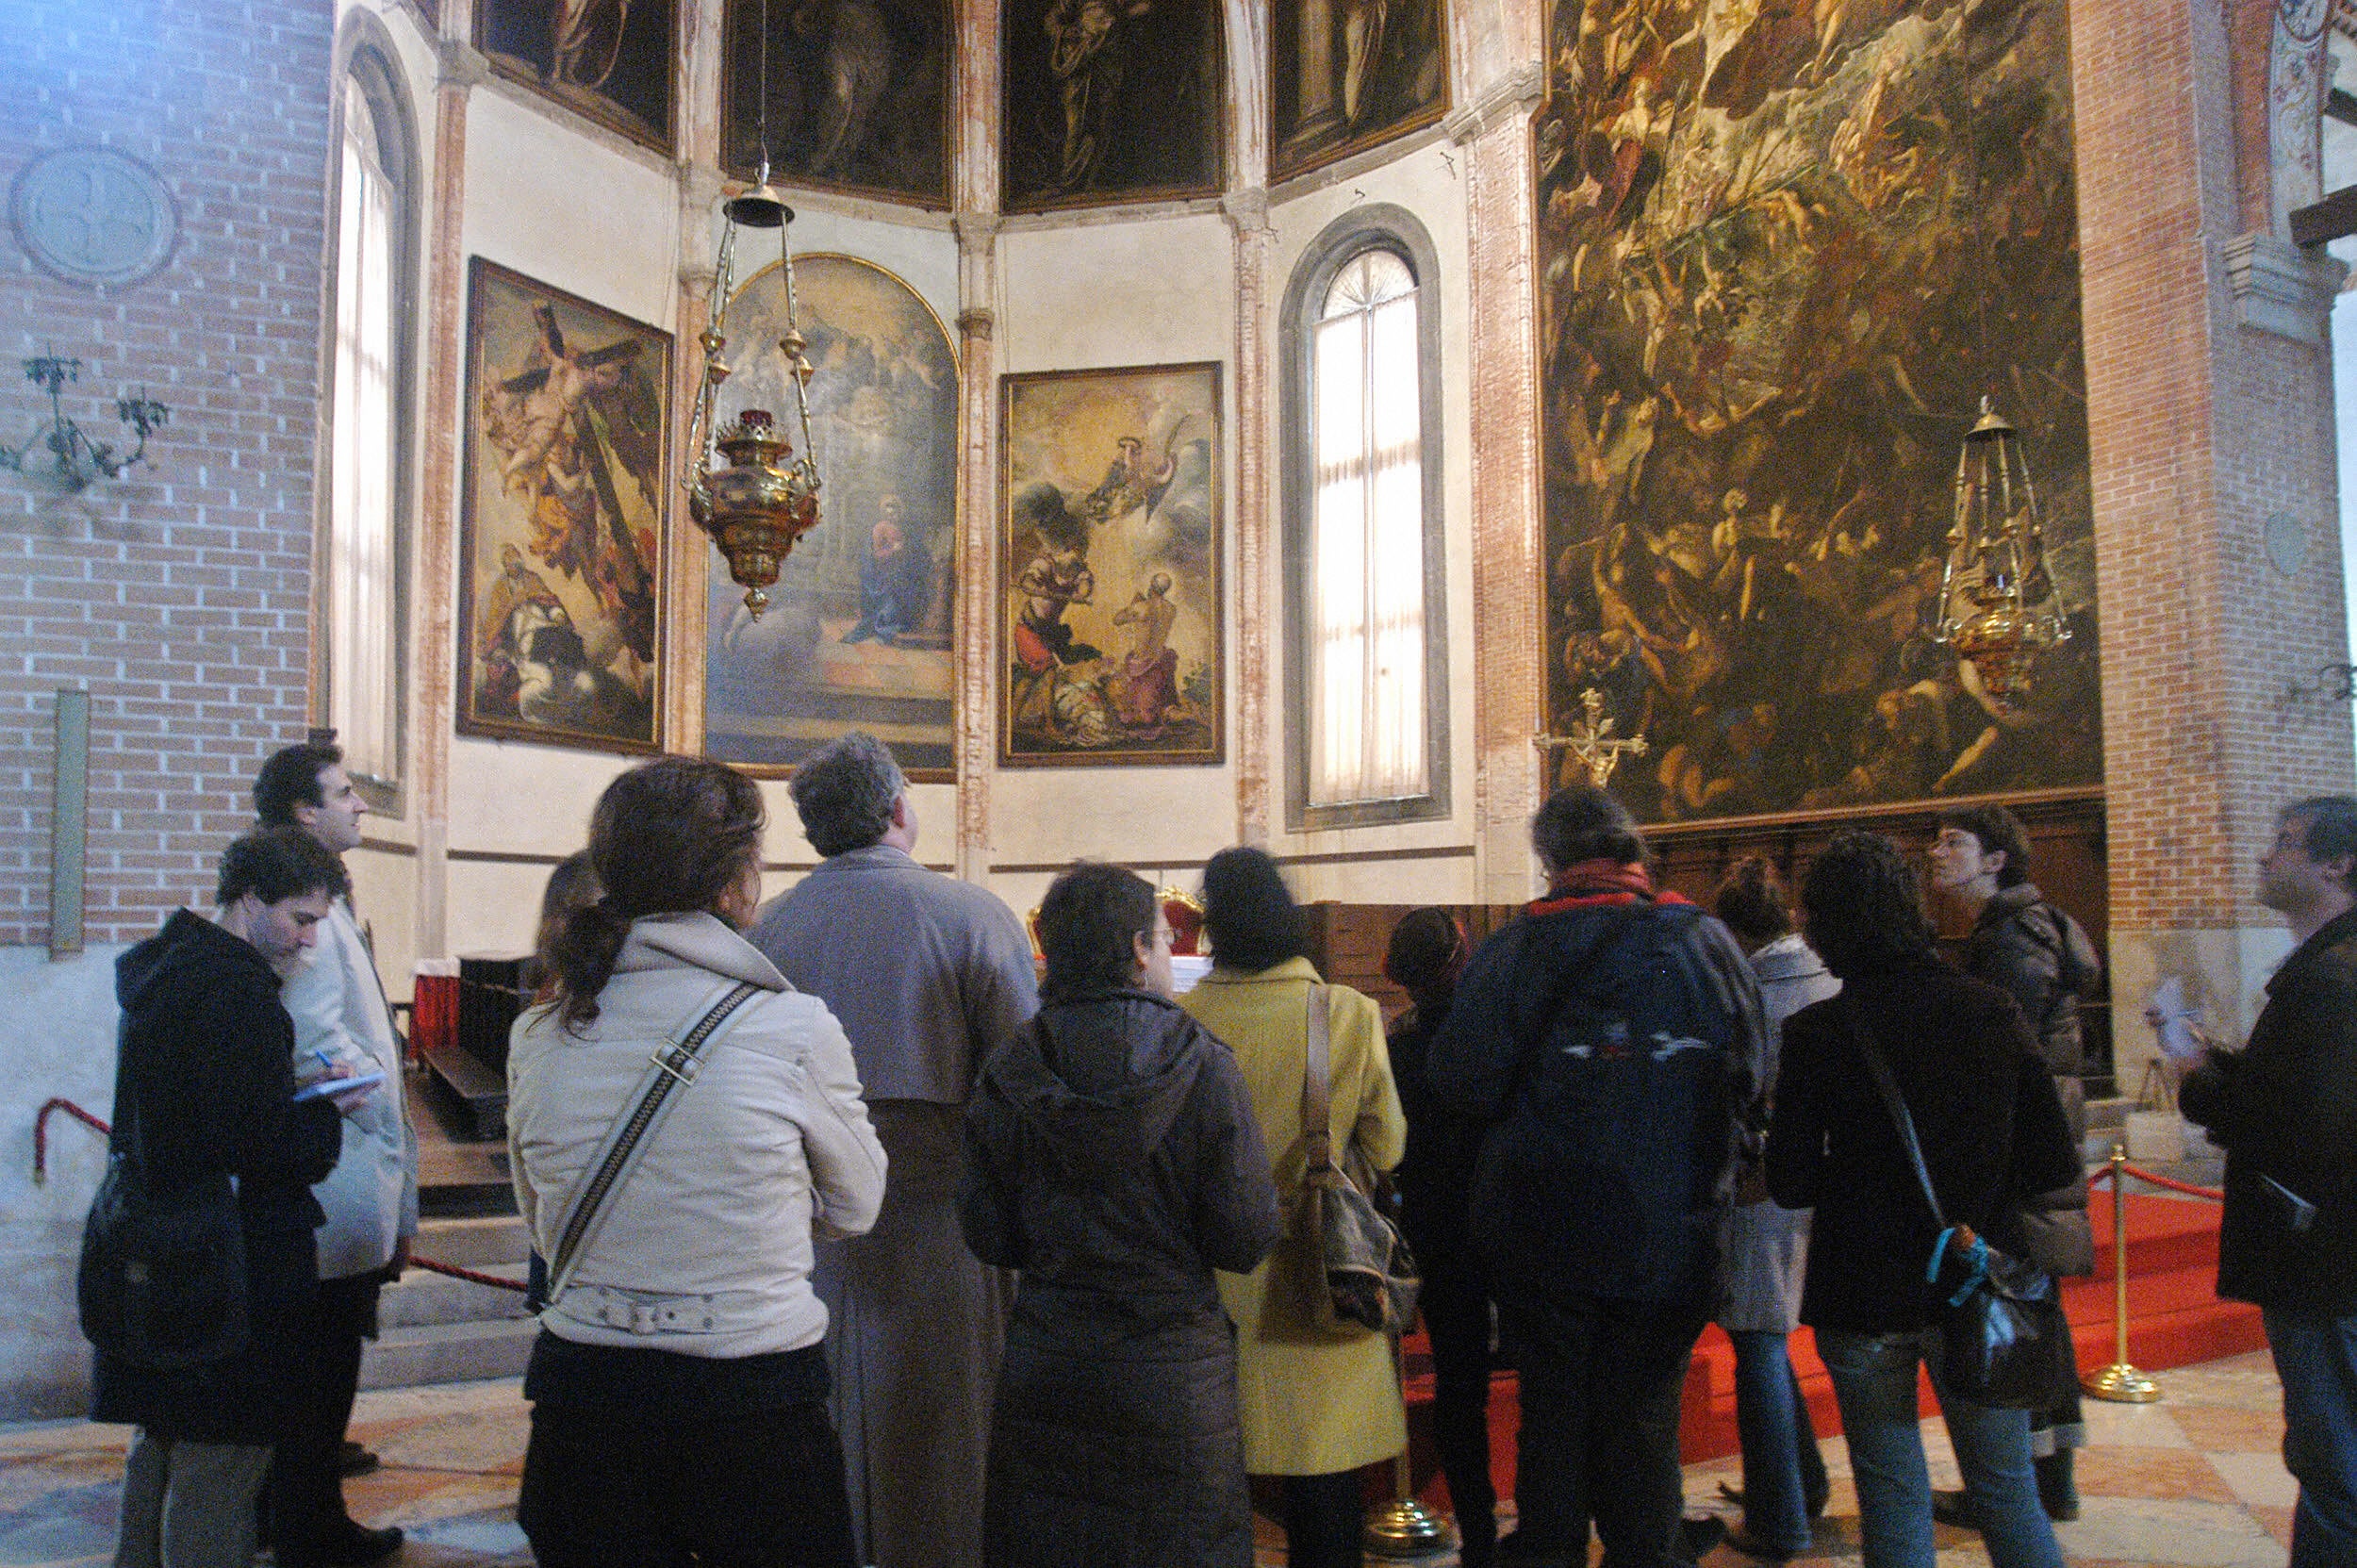 Visitors admire the paintings in Madonna dell'Orto church (AFP/Getty)